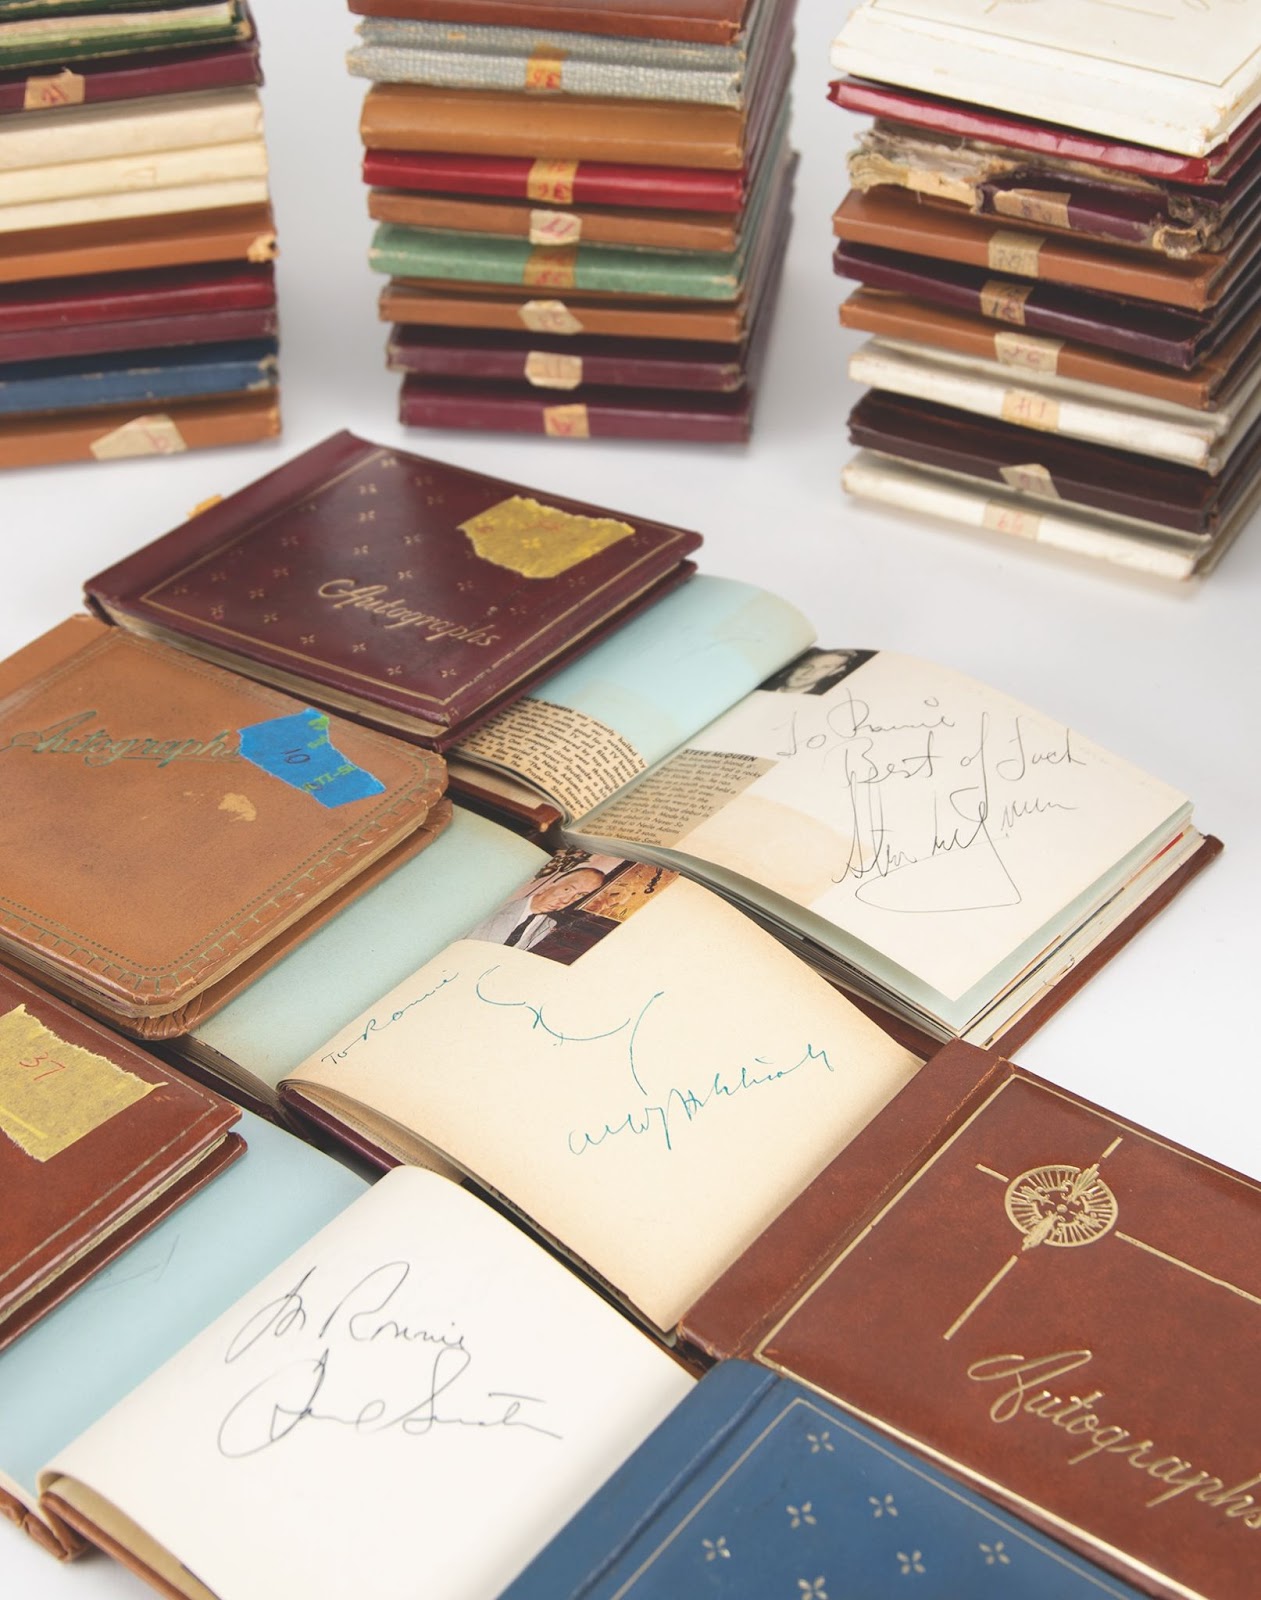 Extensive autograph archive of over 30 albums featuring signatures and signed photographs. Highlights from this collection include Audrey Hepburn, Steve McQueen, and Judy Garland. This impressive collection closed at a high bid of $124,781 at RR Auction.